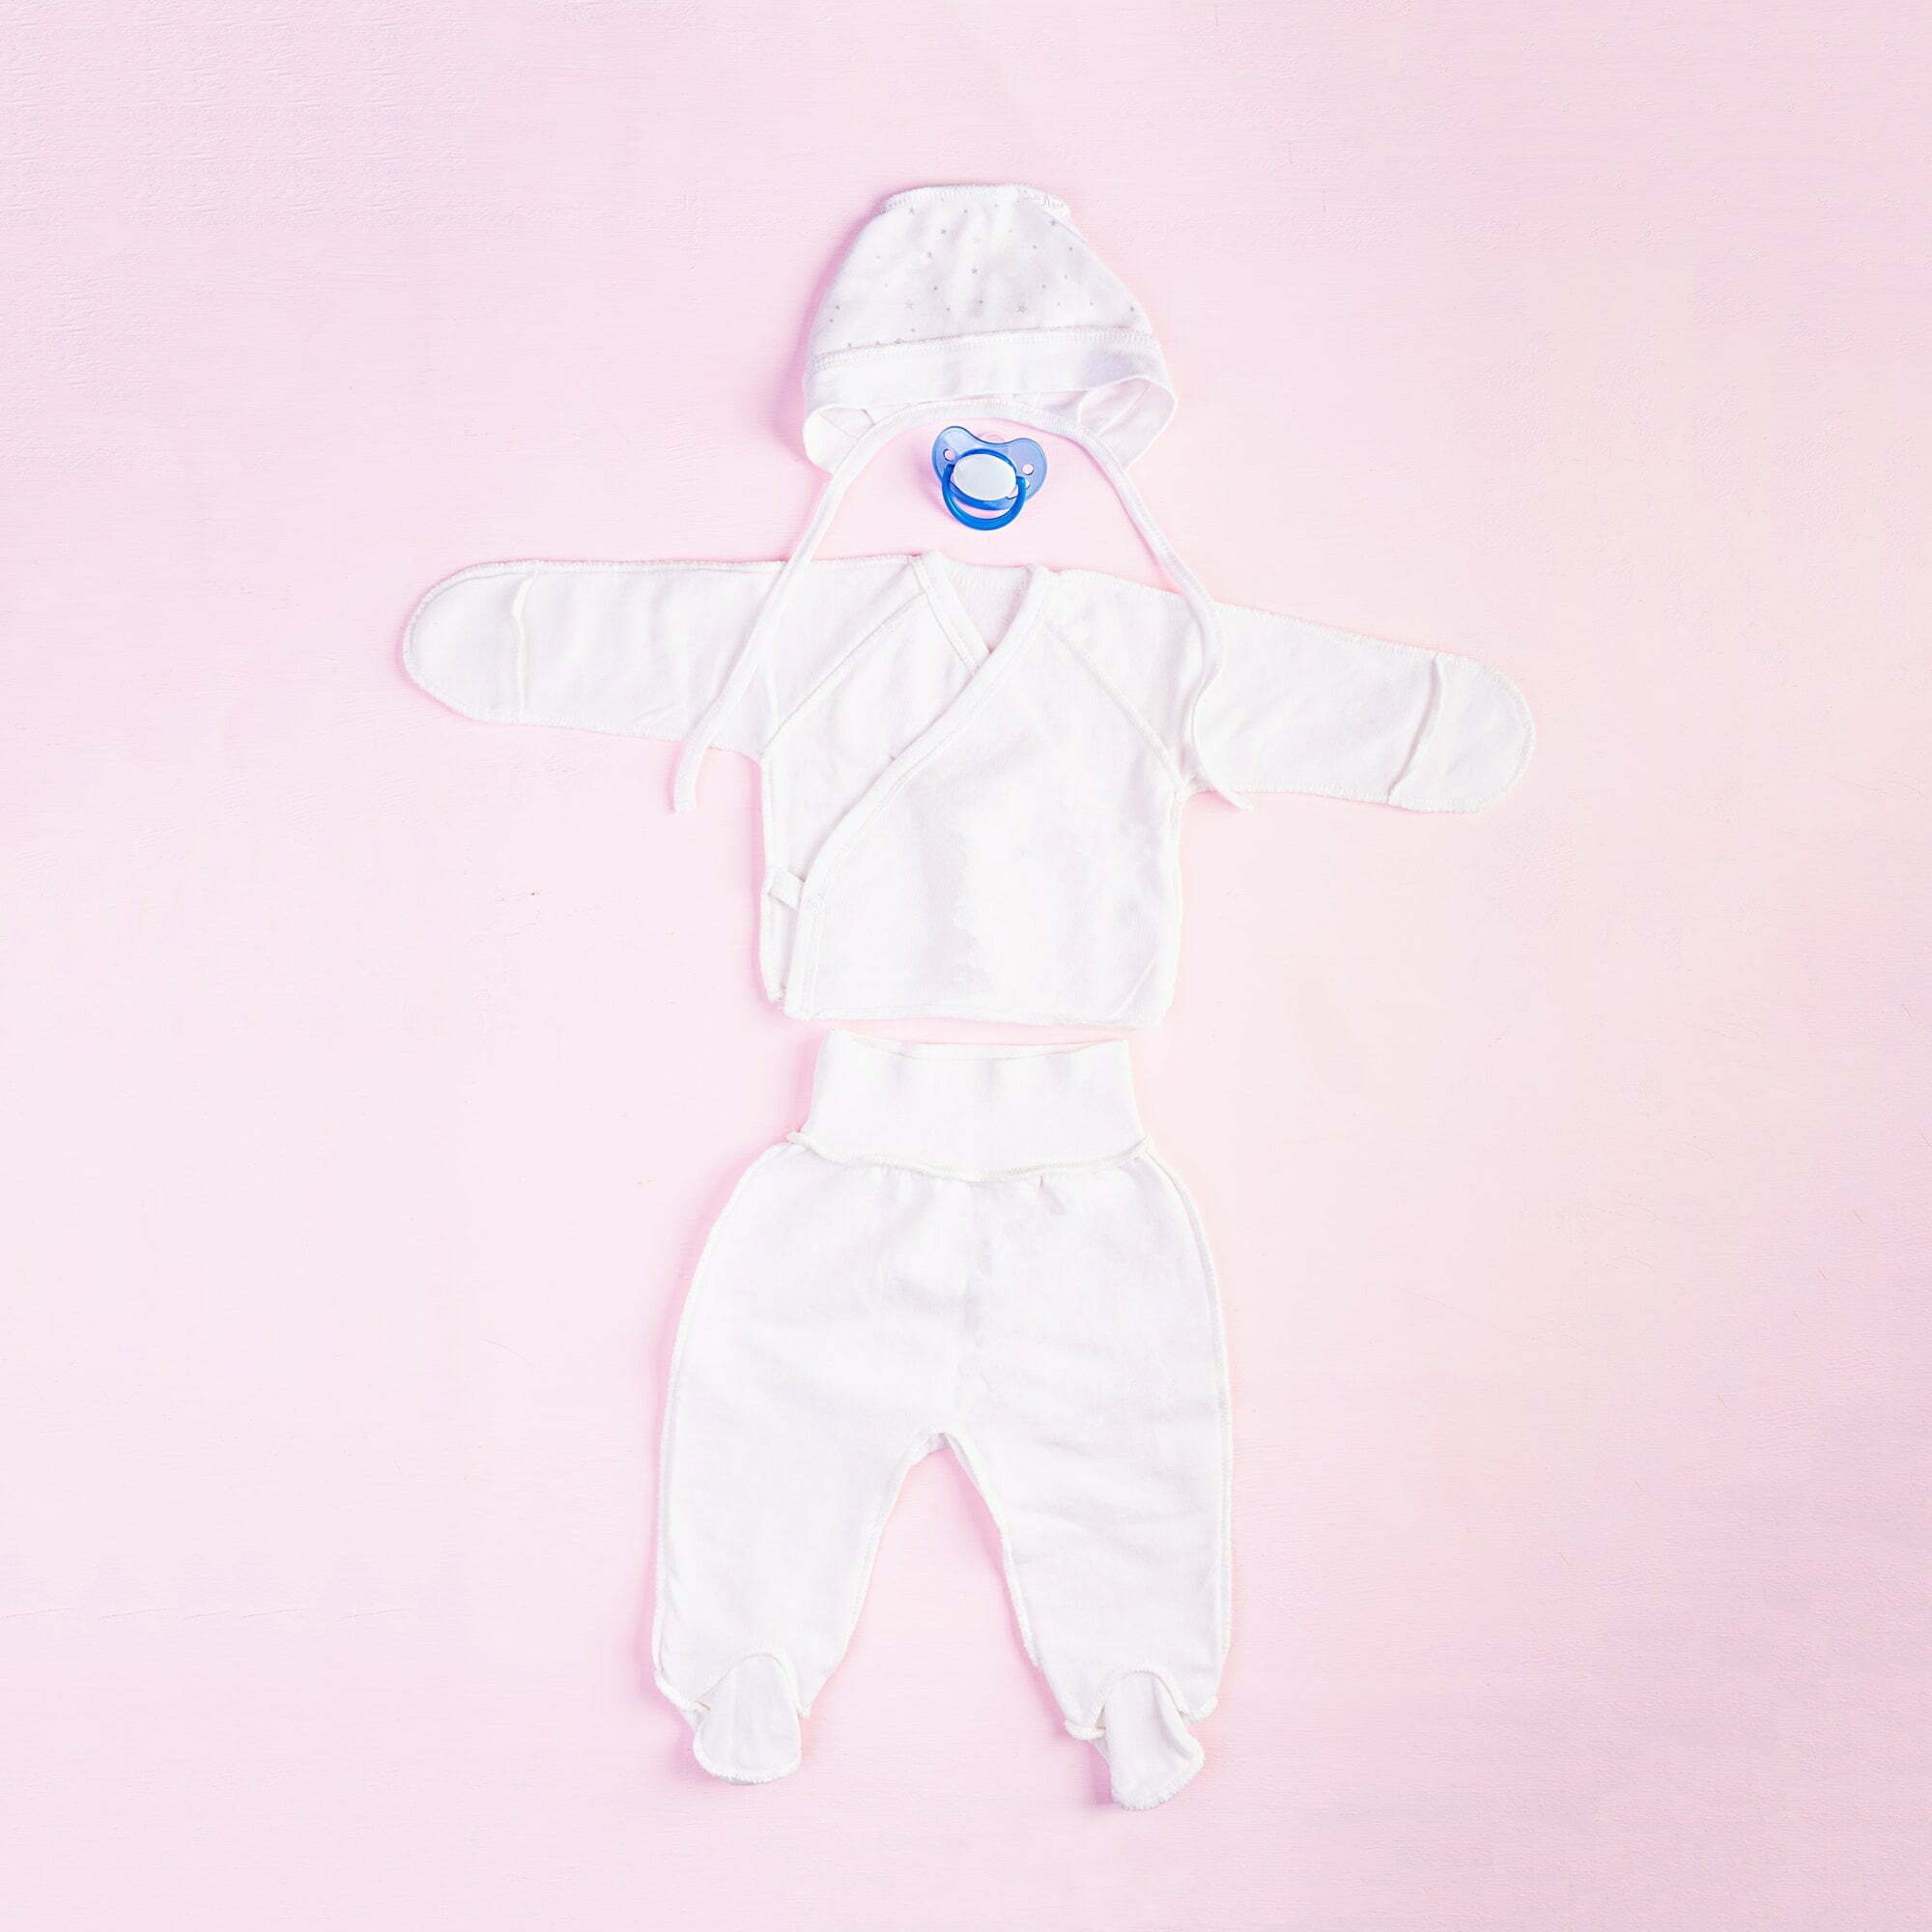 Baby clothes and other stuff for child on pink background. Newborn baby concept. Top view